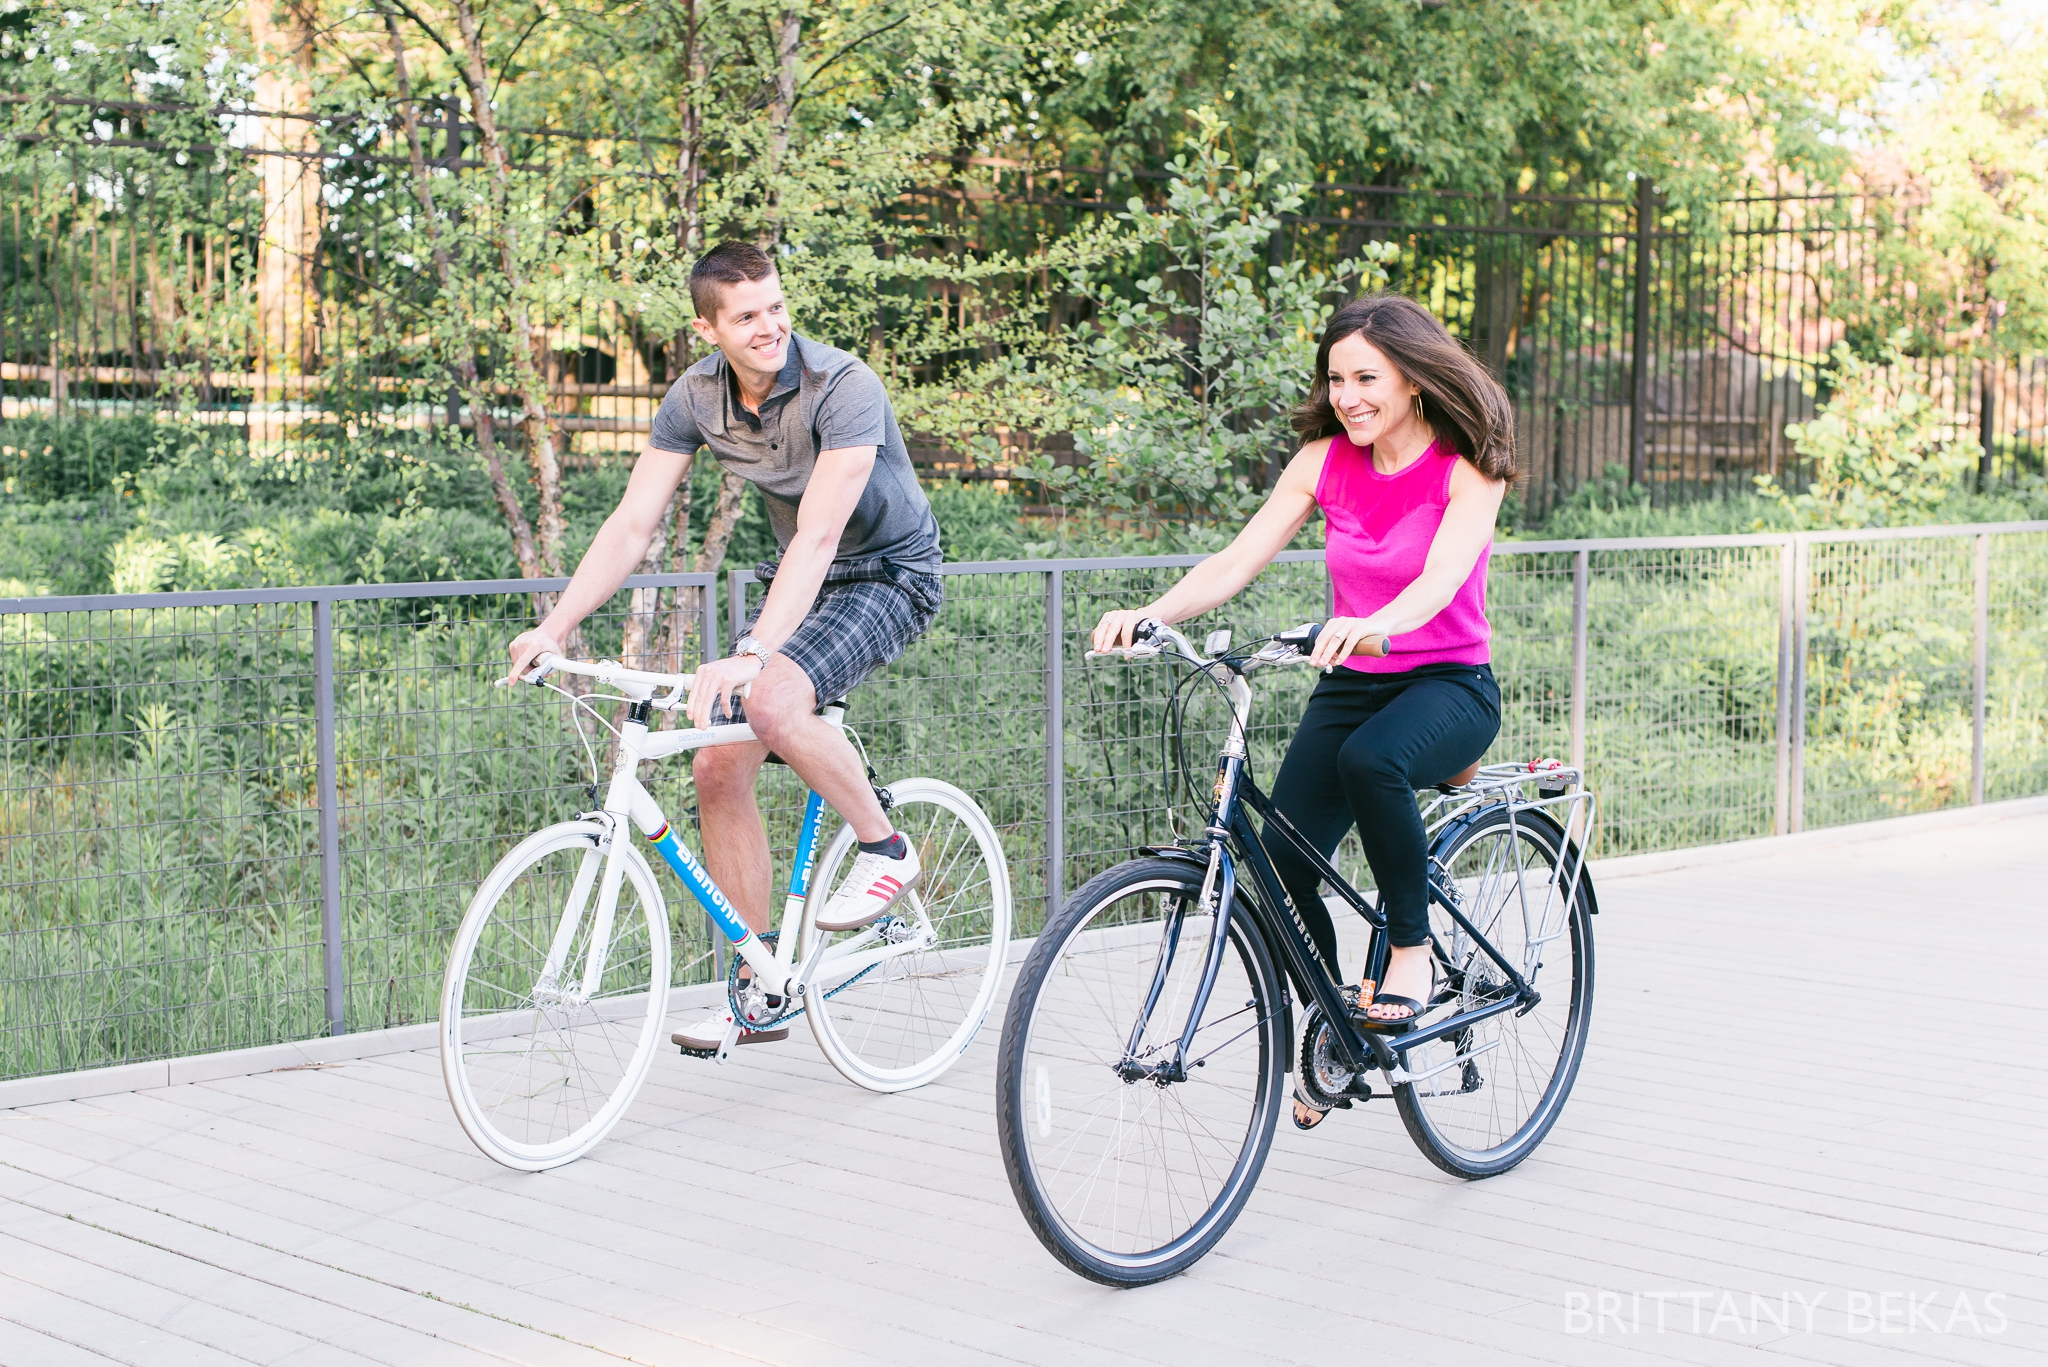 Chicago Engagement - Lincoln Park Engagement Photos - Brittany Bekas Photography_0002